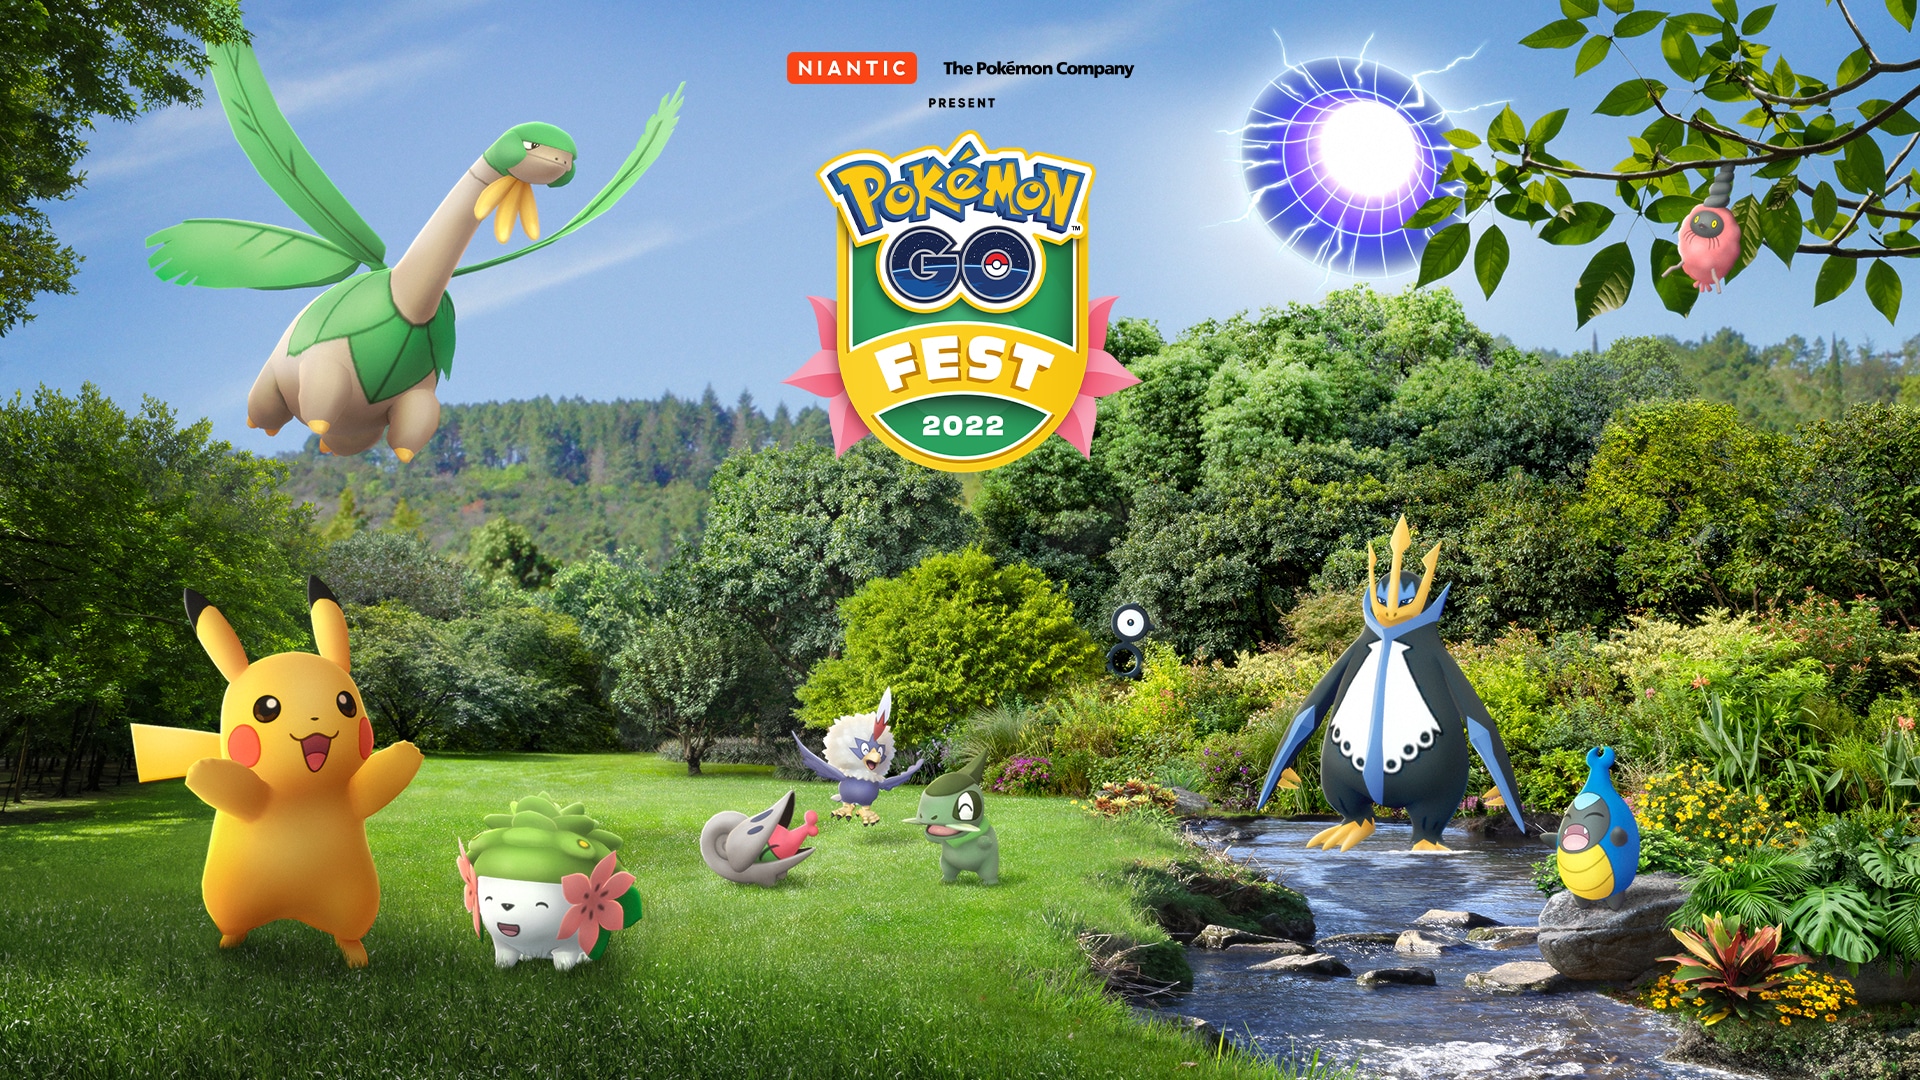 Pokémon Go: Events in August 2022 - what you don't want to miss!